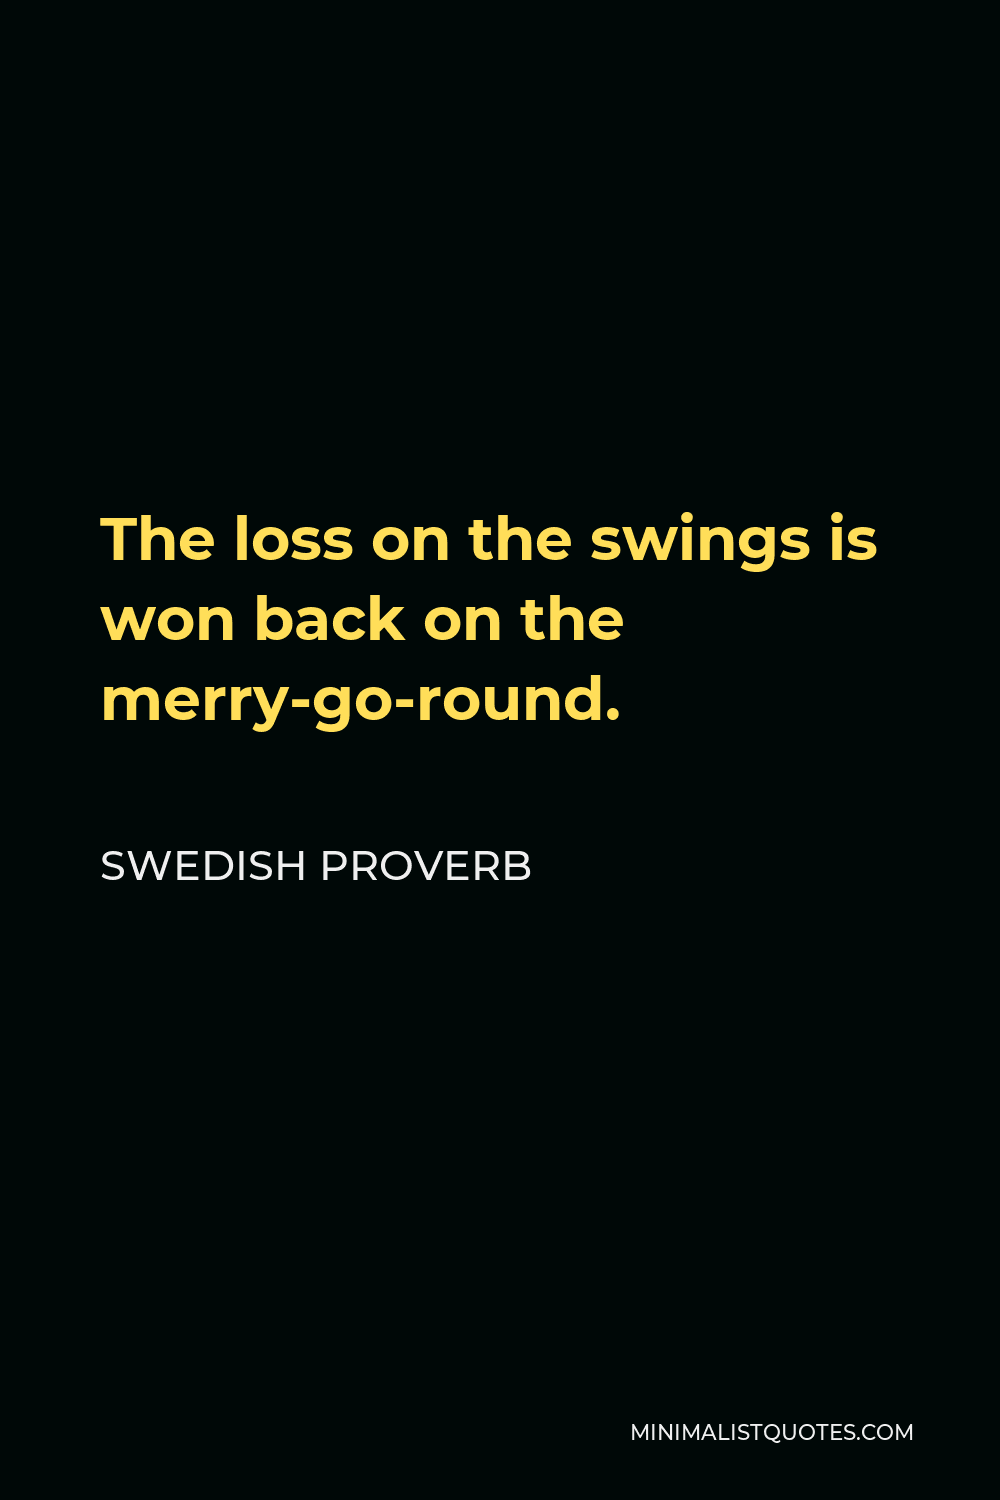 Swedish Proverb Quote - The loss on the swings is won back on the merry-go-round.